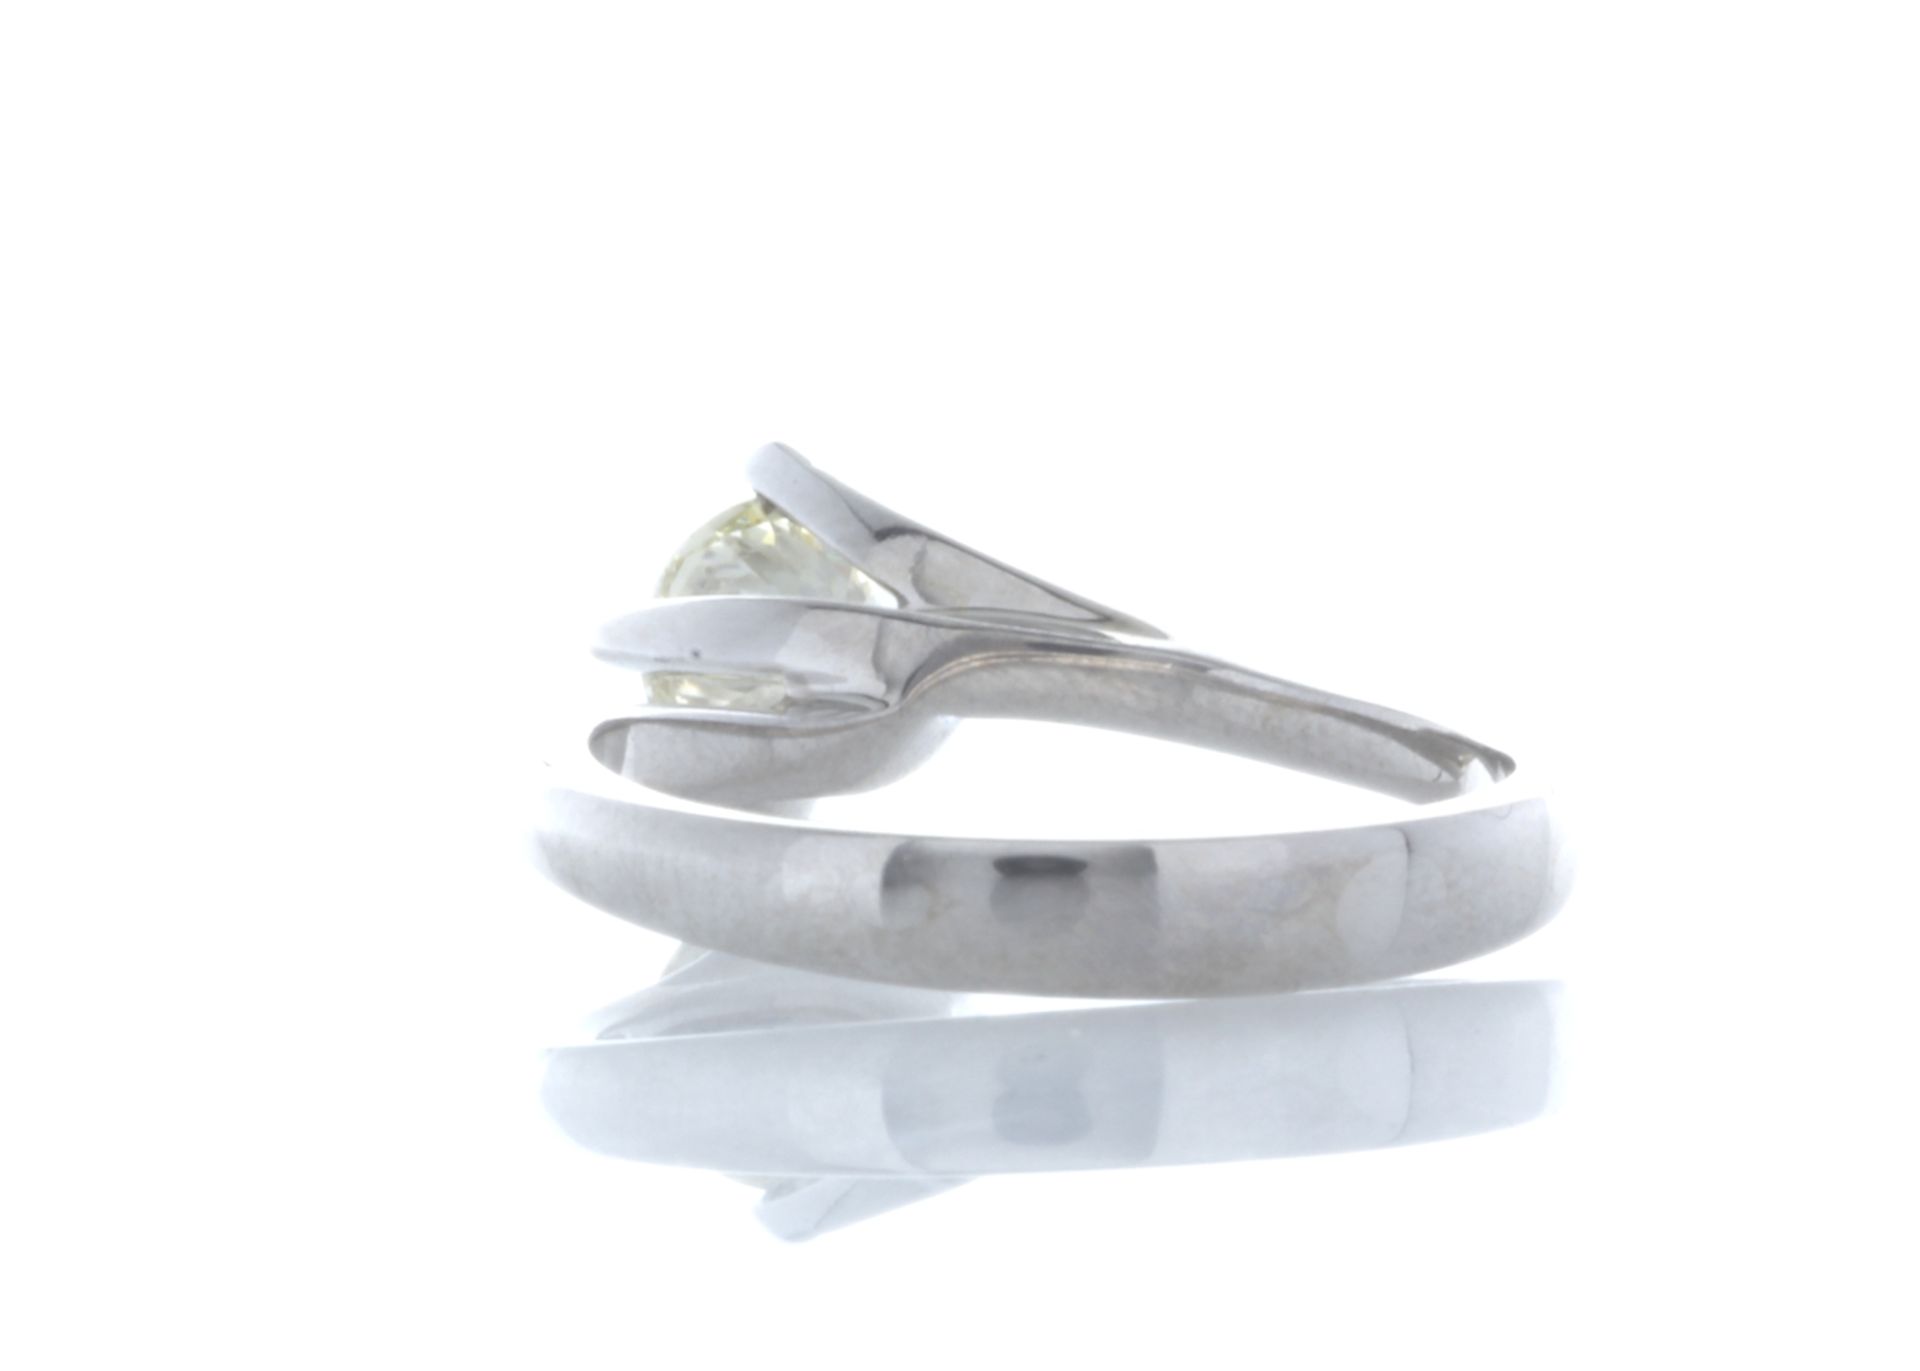 18ct White Gold Single Stone Fancy Claw Set Diamond Ring 0.71 Carats - Valued by IDI £7,250.00 - - Image 3 of 5